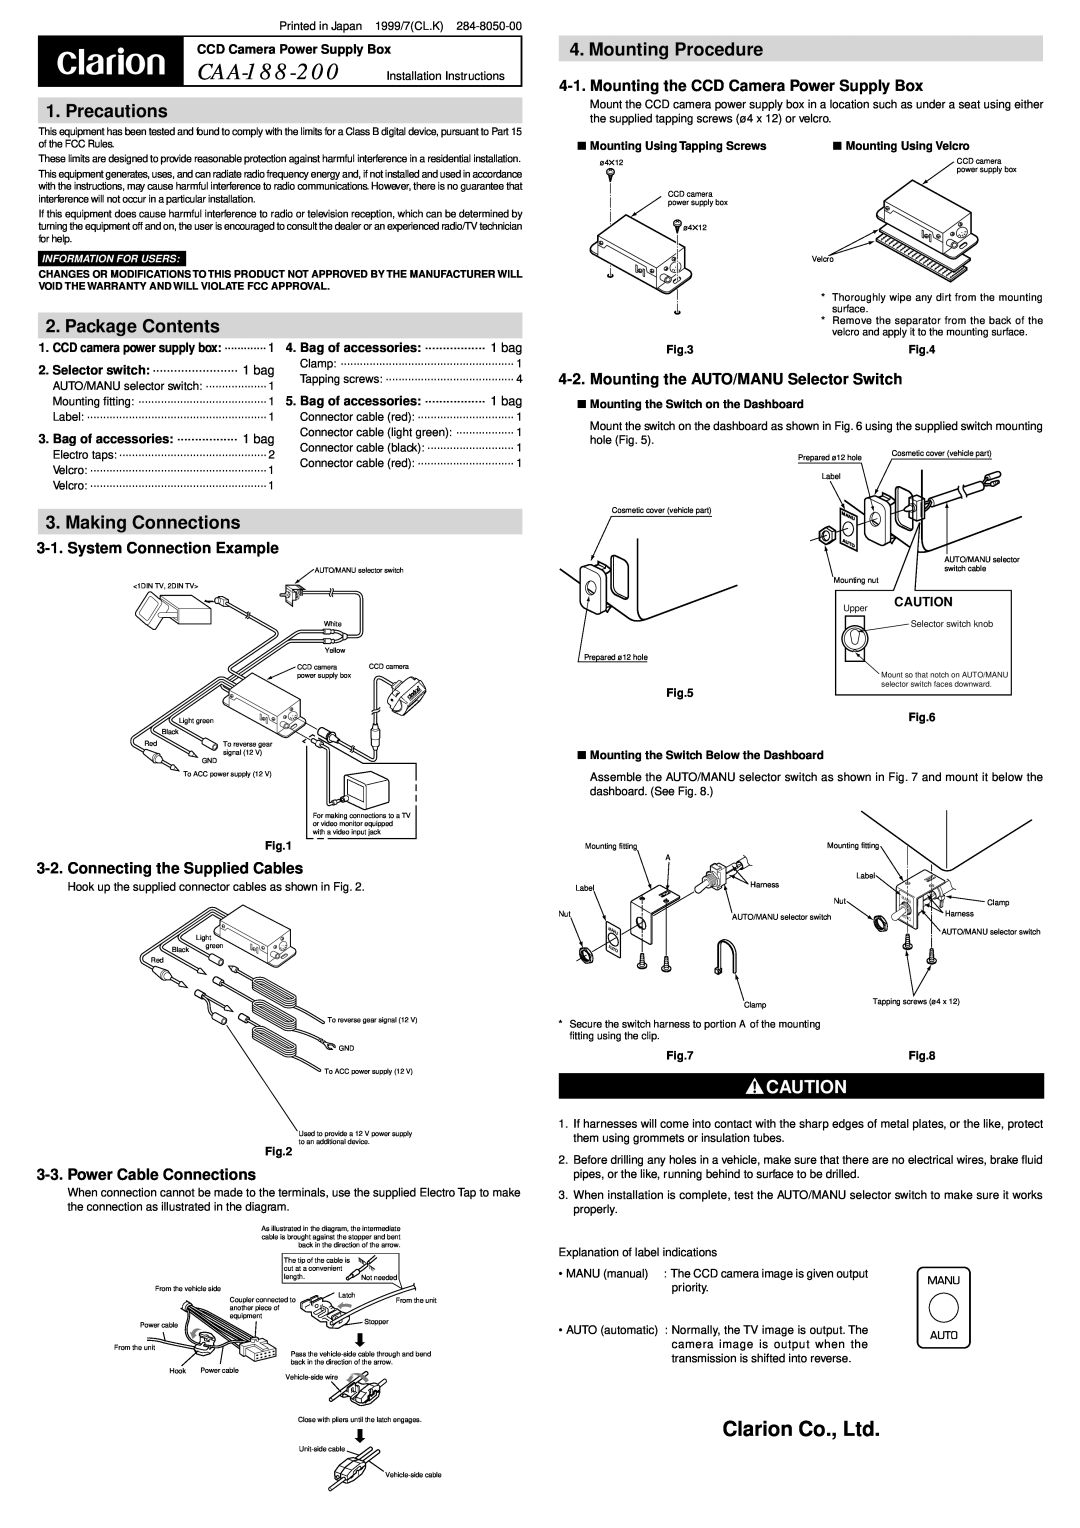 Clarion CAA-188-200 installation instructions Mounting Procedure, Precautions, Package Contents, Making Connections 